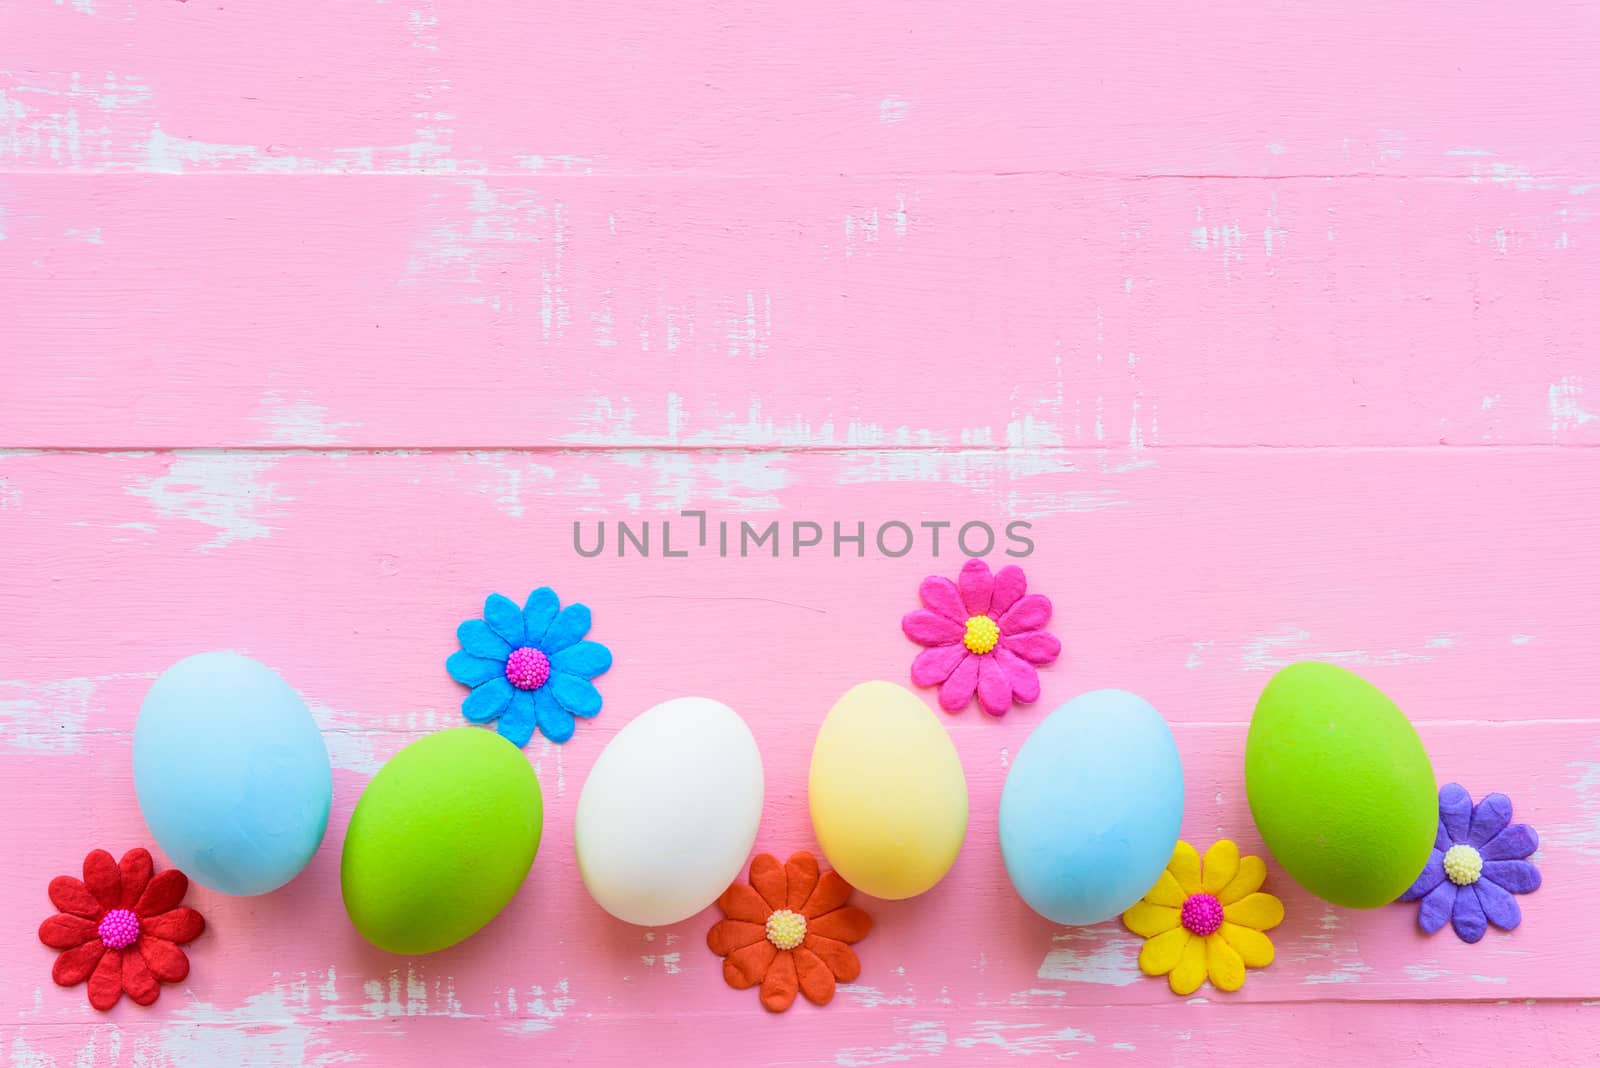 Row Easter eggs with colorful paper flowers on bright pink and white wooden background.